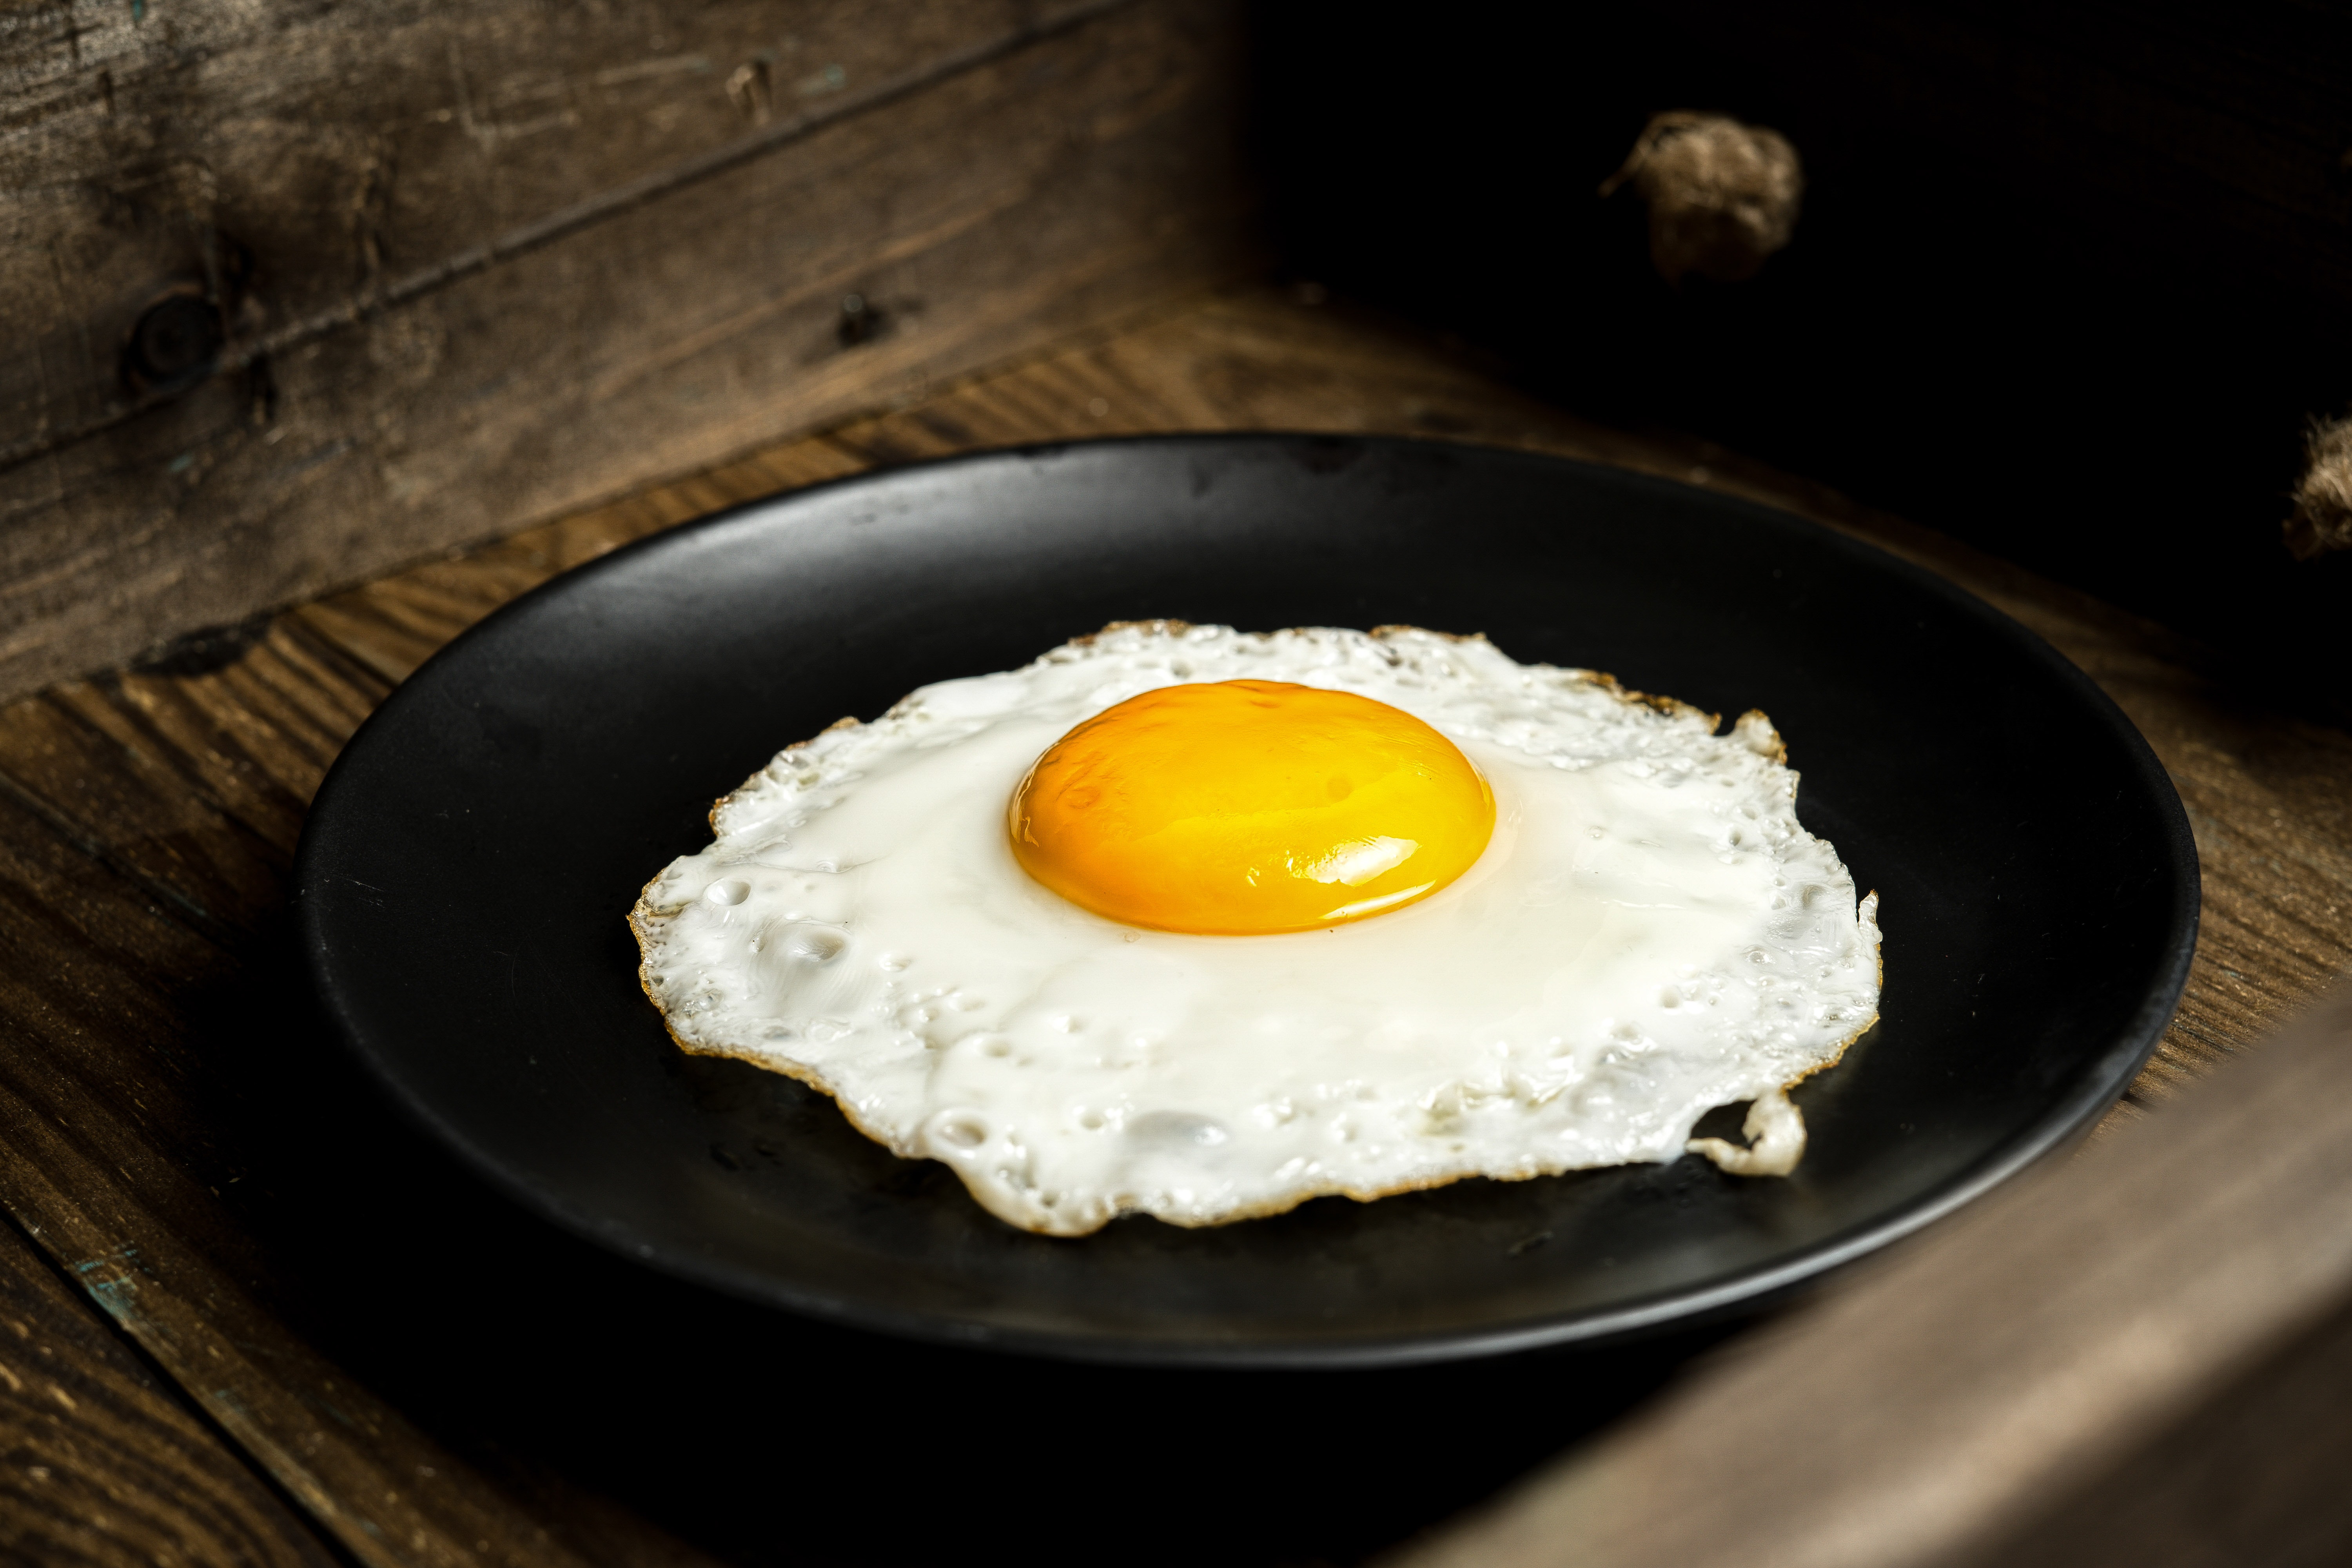 How to Fry an Egg the Right Way